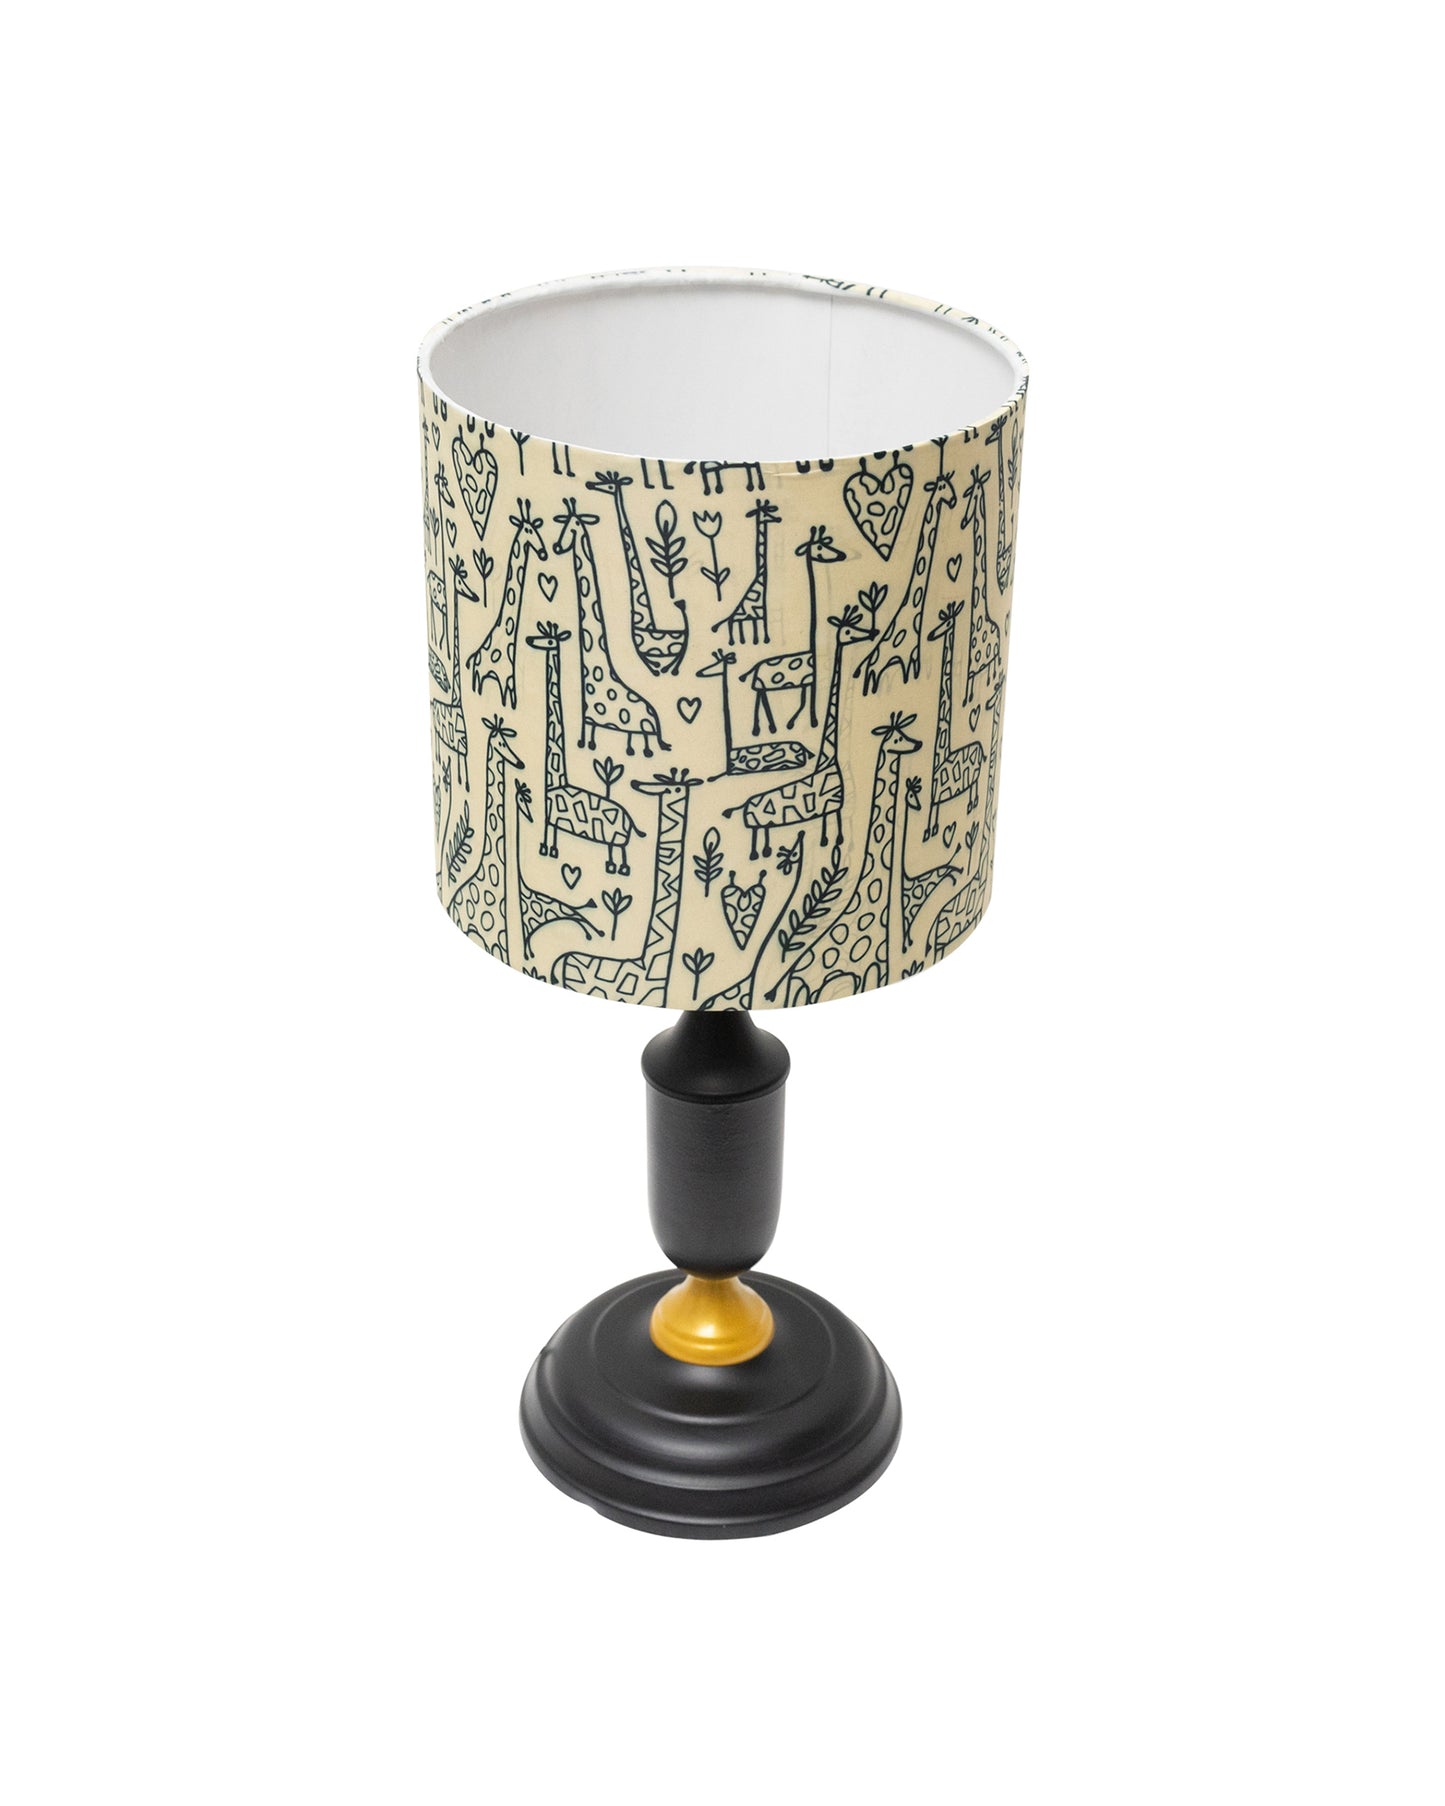 Murphy Black Table Lamp with Shade, LED bulb included